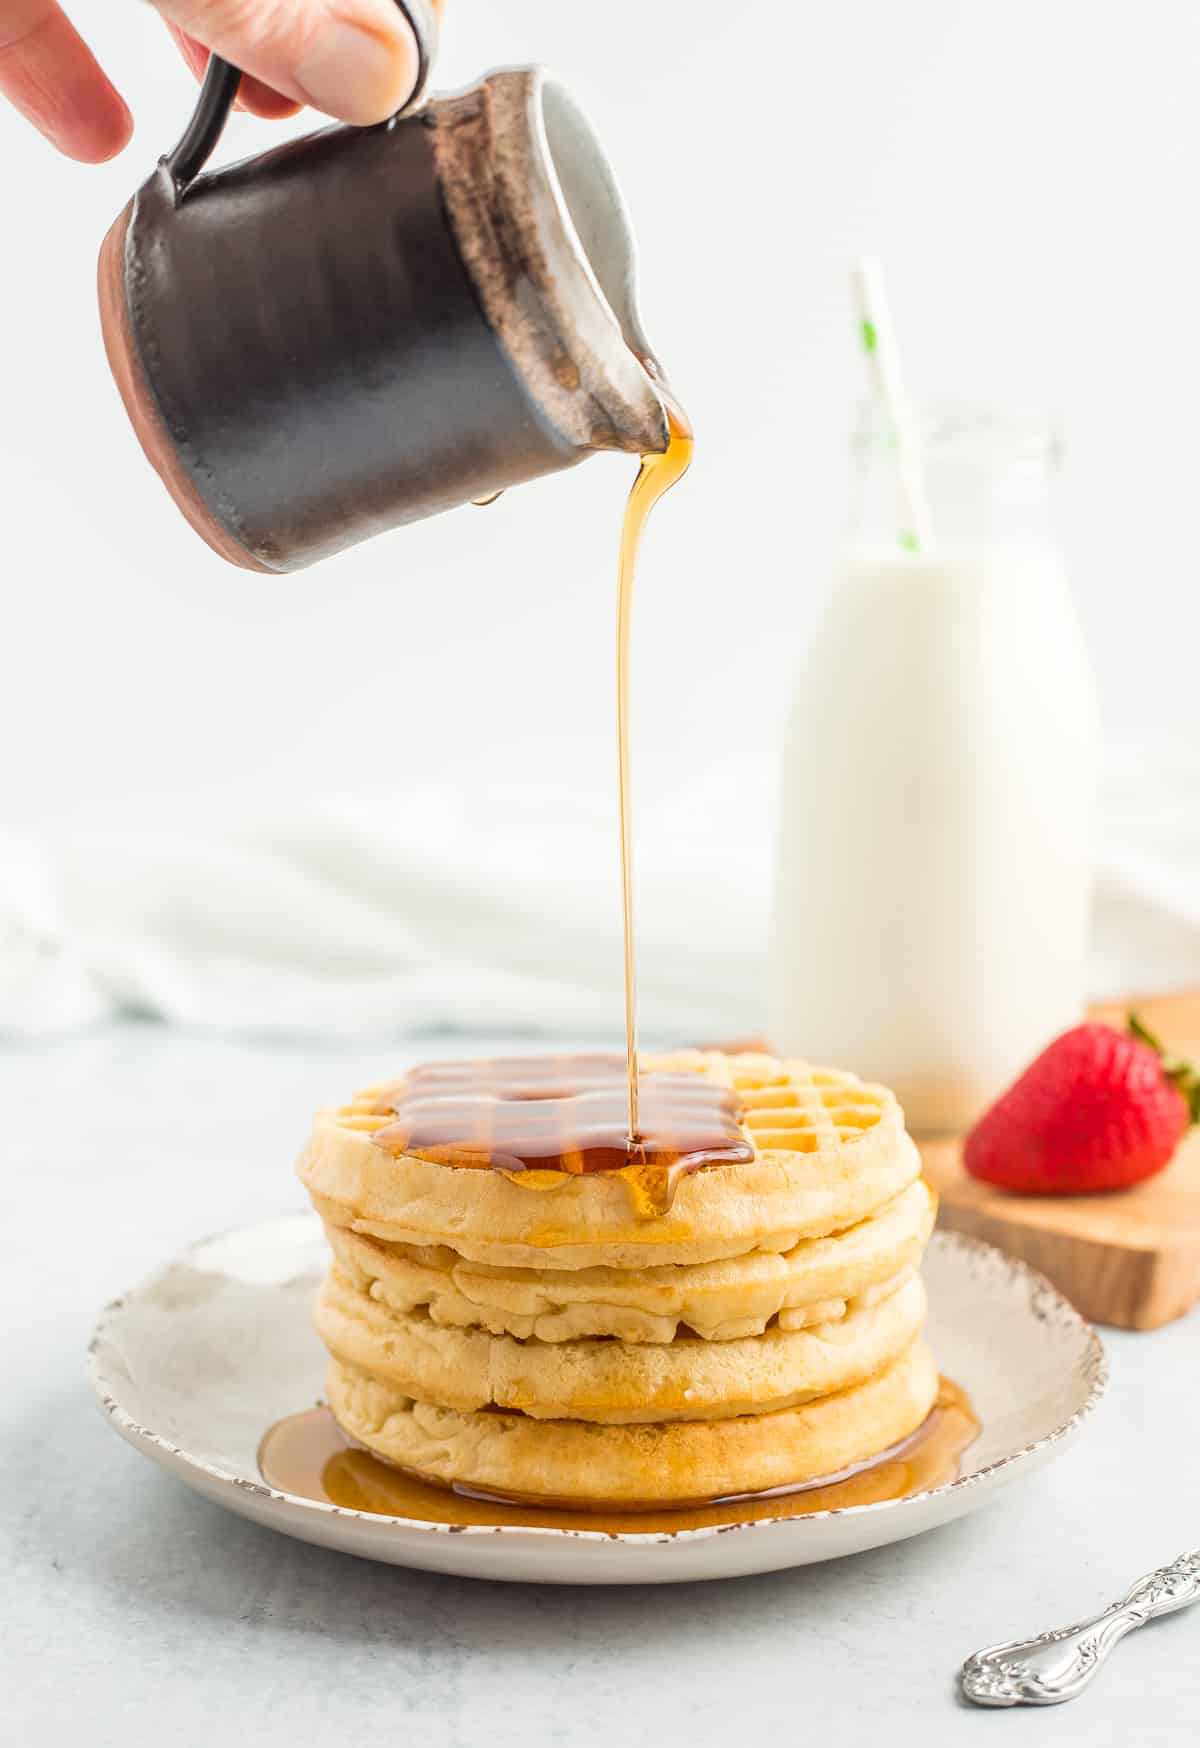 maple syrup being poured over a stack of waffles.